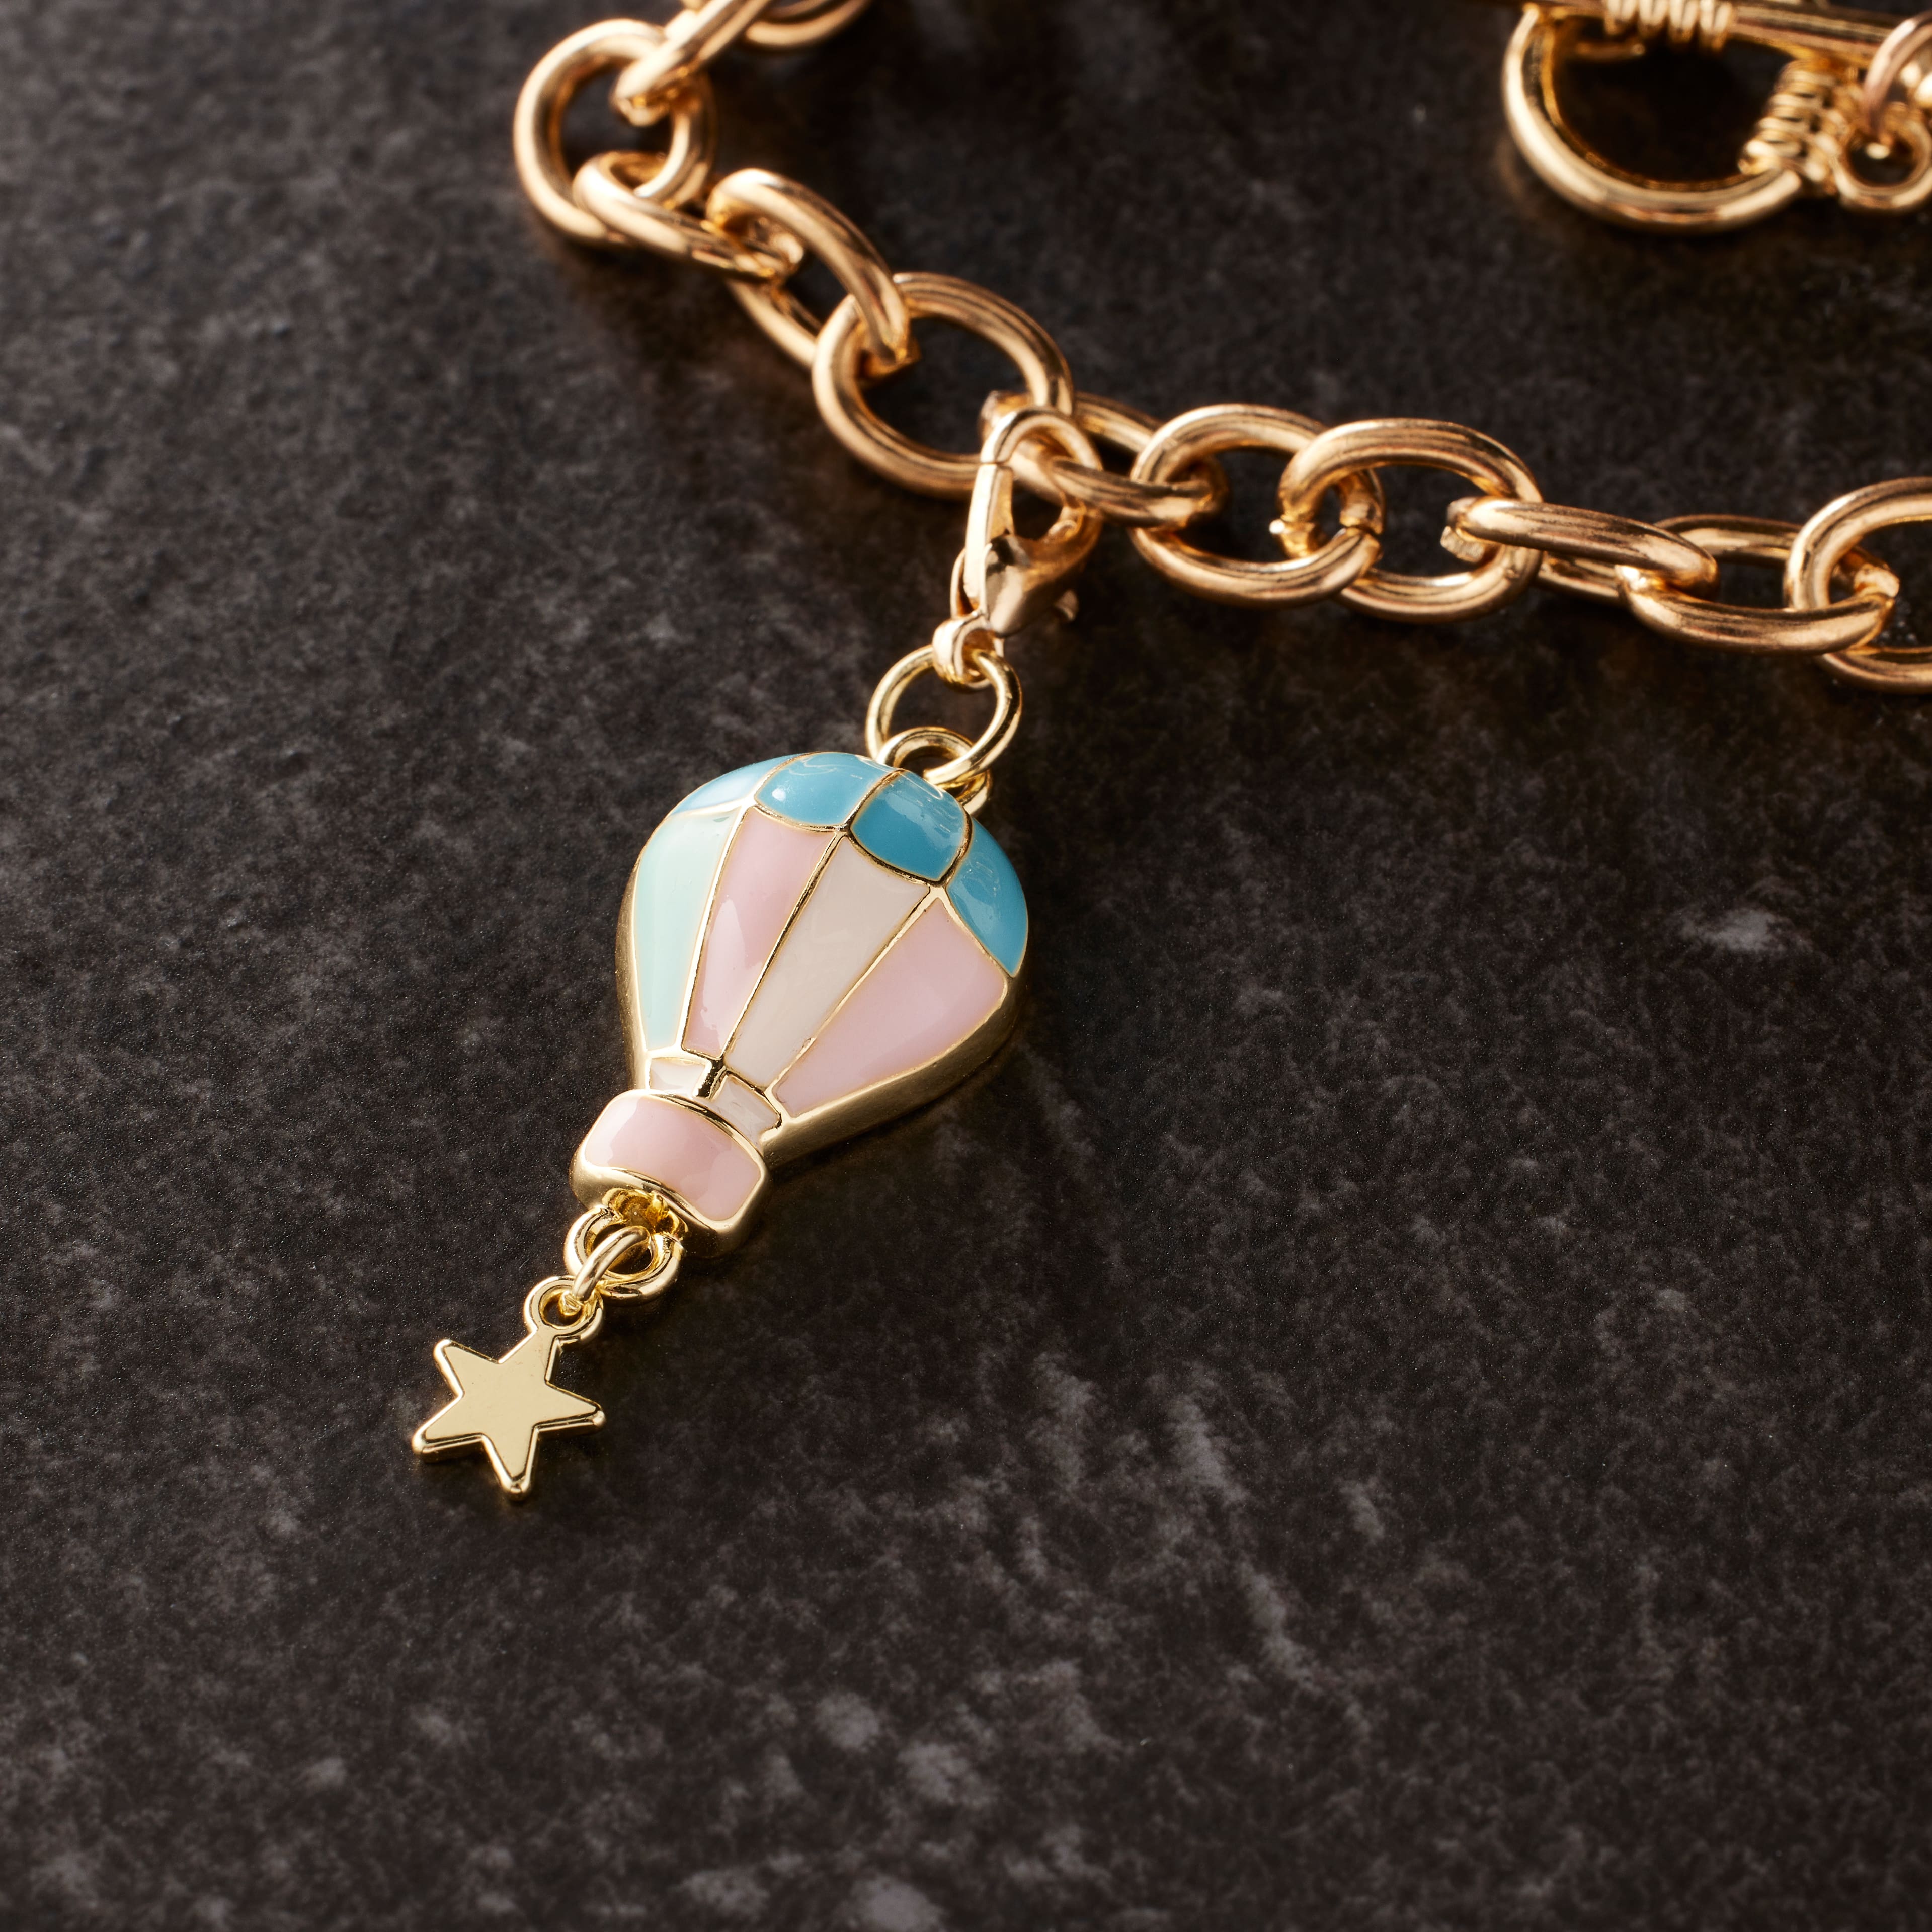 Gold, Pink & Blue Hot Air Balloon Charm by Bead Landing™